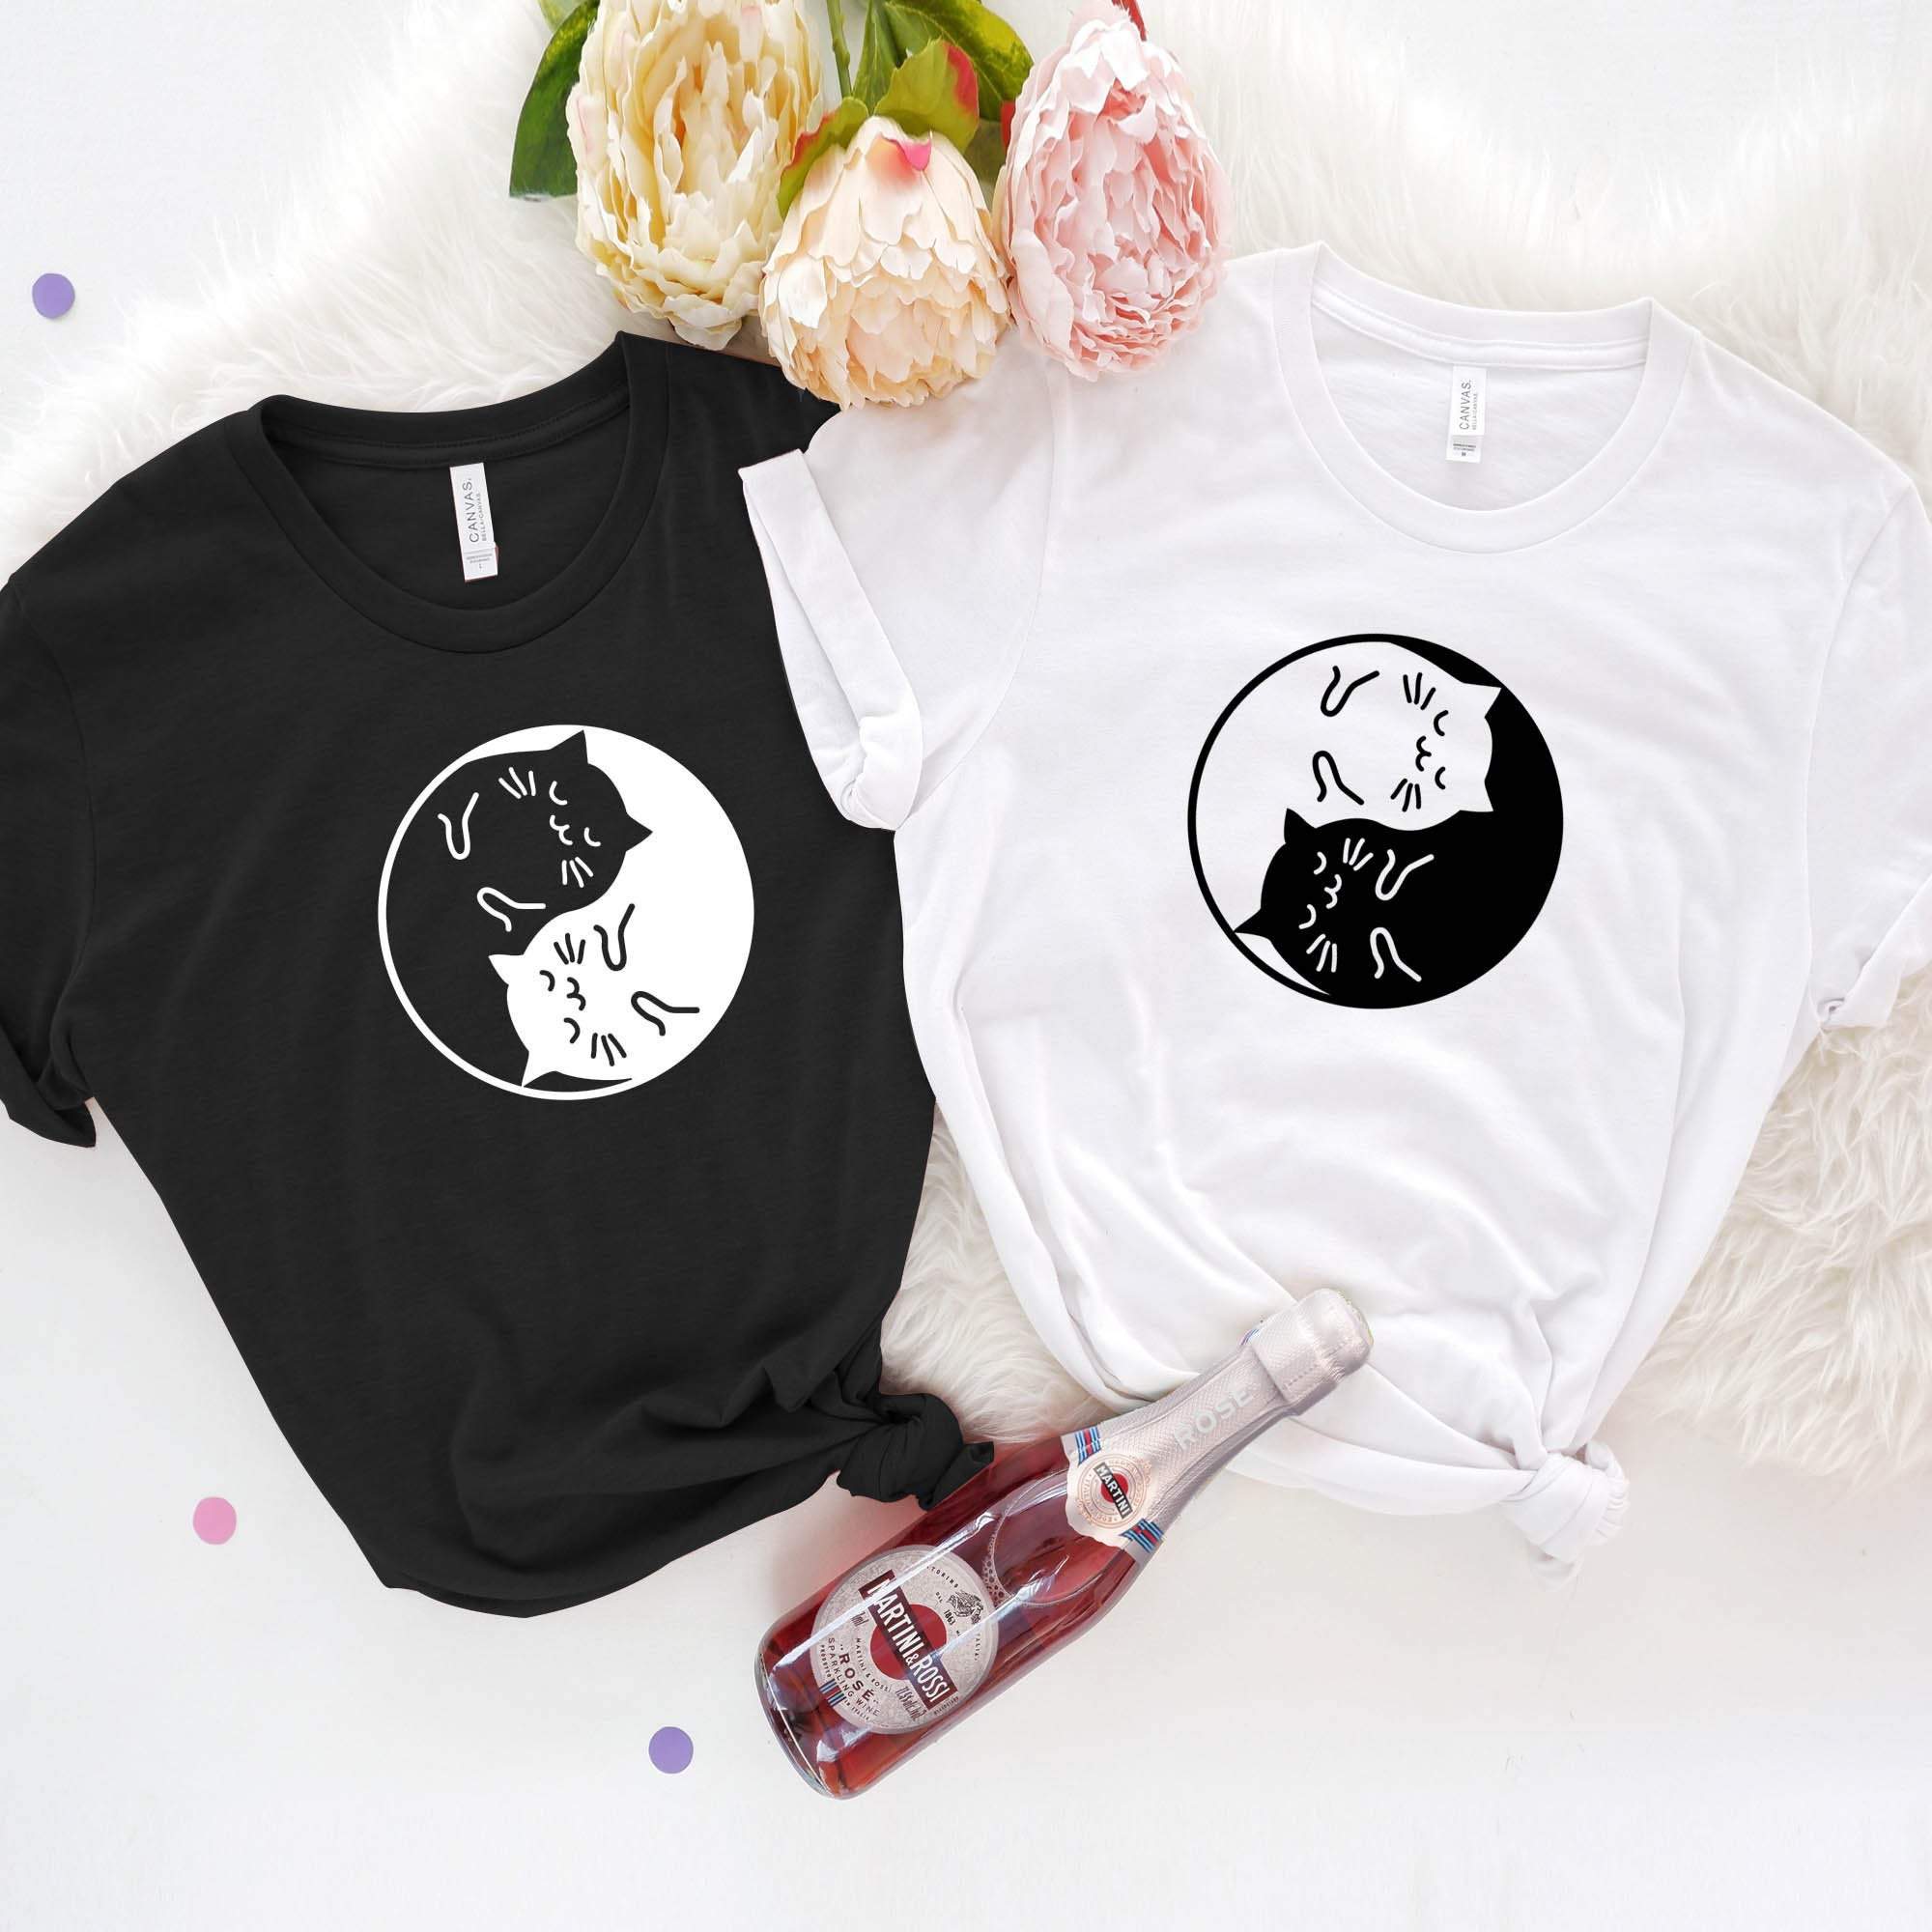 Yin Yang cute cat t-shirt, Gift For Cat Owner, Gift for her him, Cat lover gift